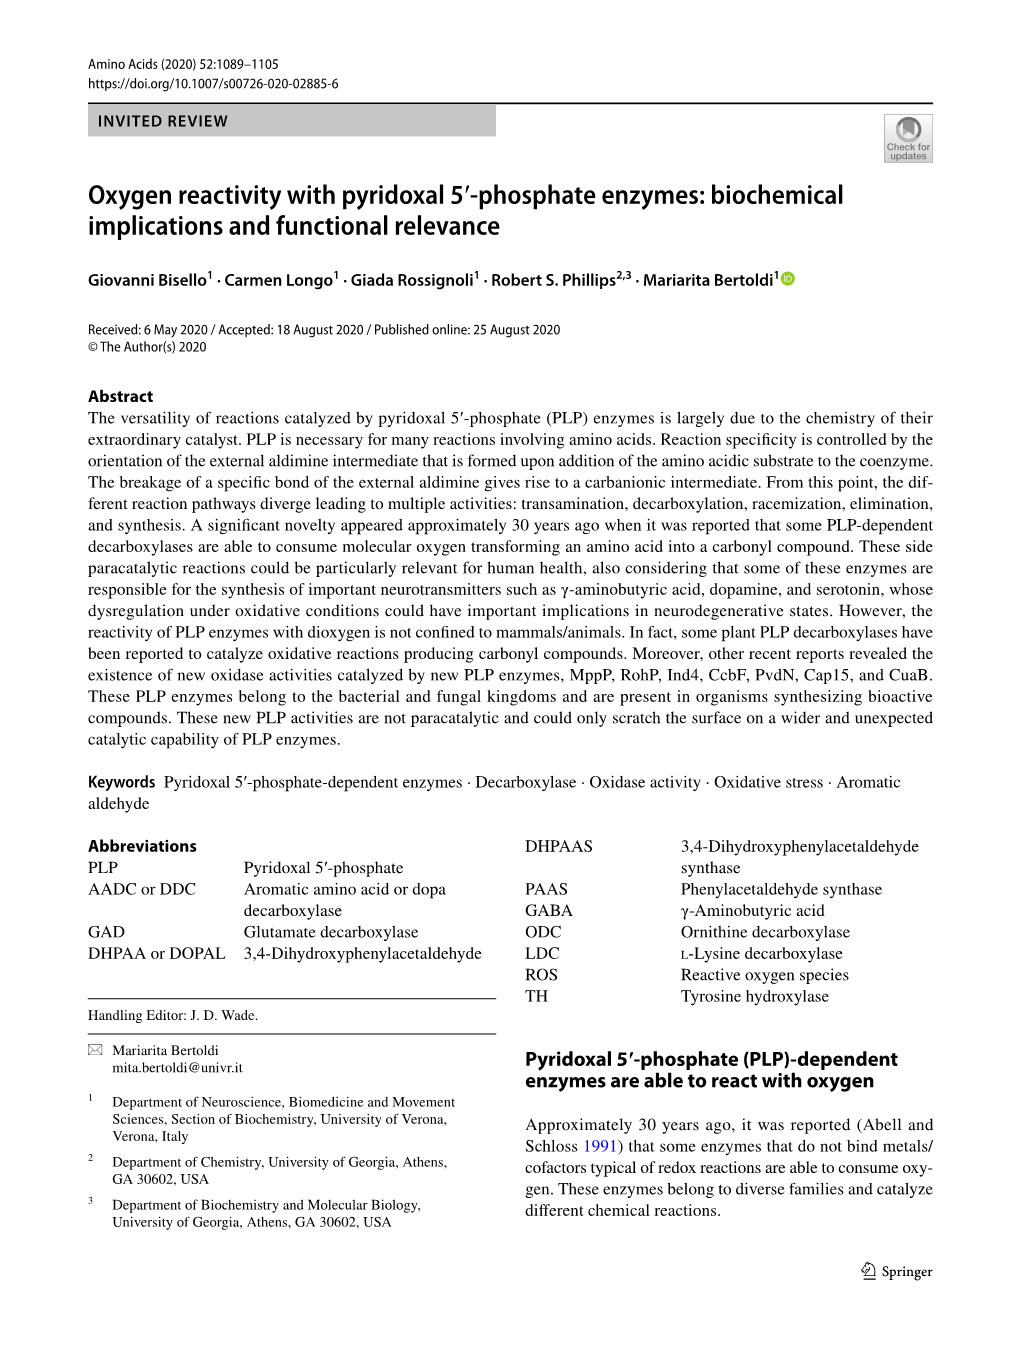 Oxygen Reactivity with Pyridoxal 5′-Phosphate Enzymes: Biochemical Implications And… 1091